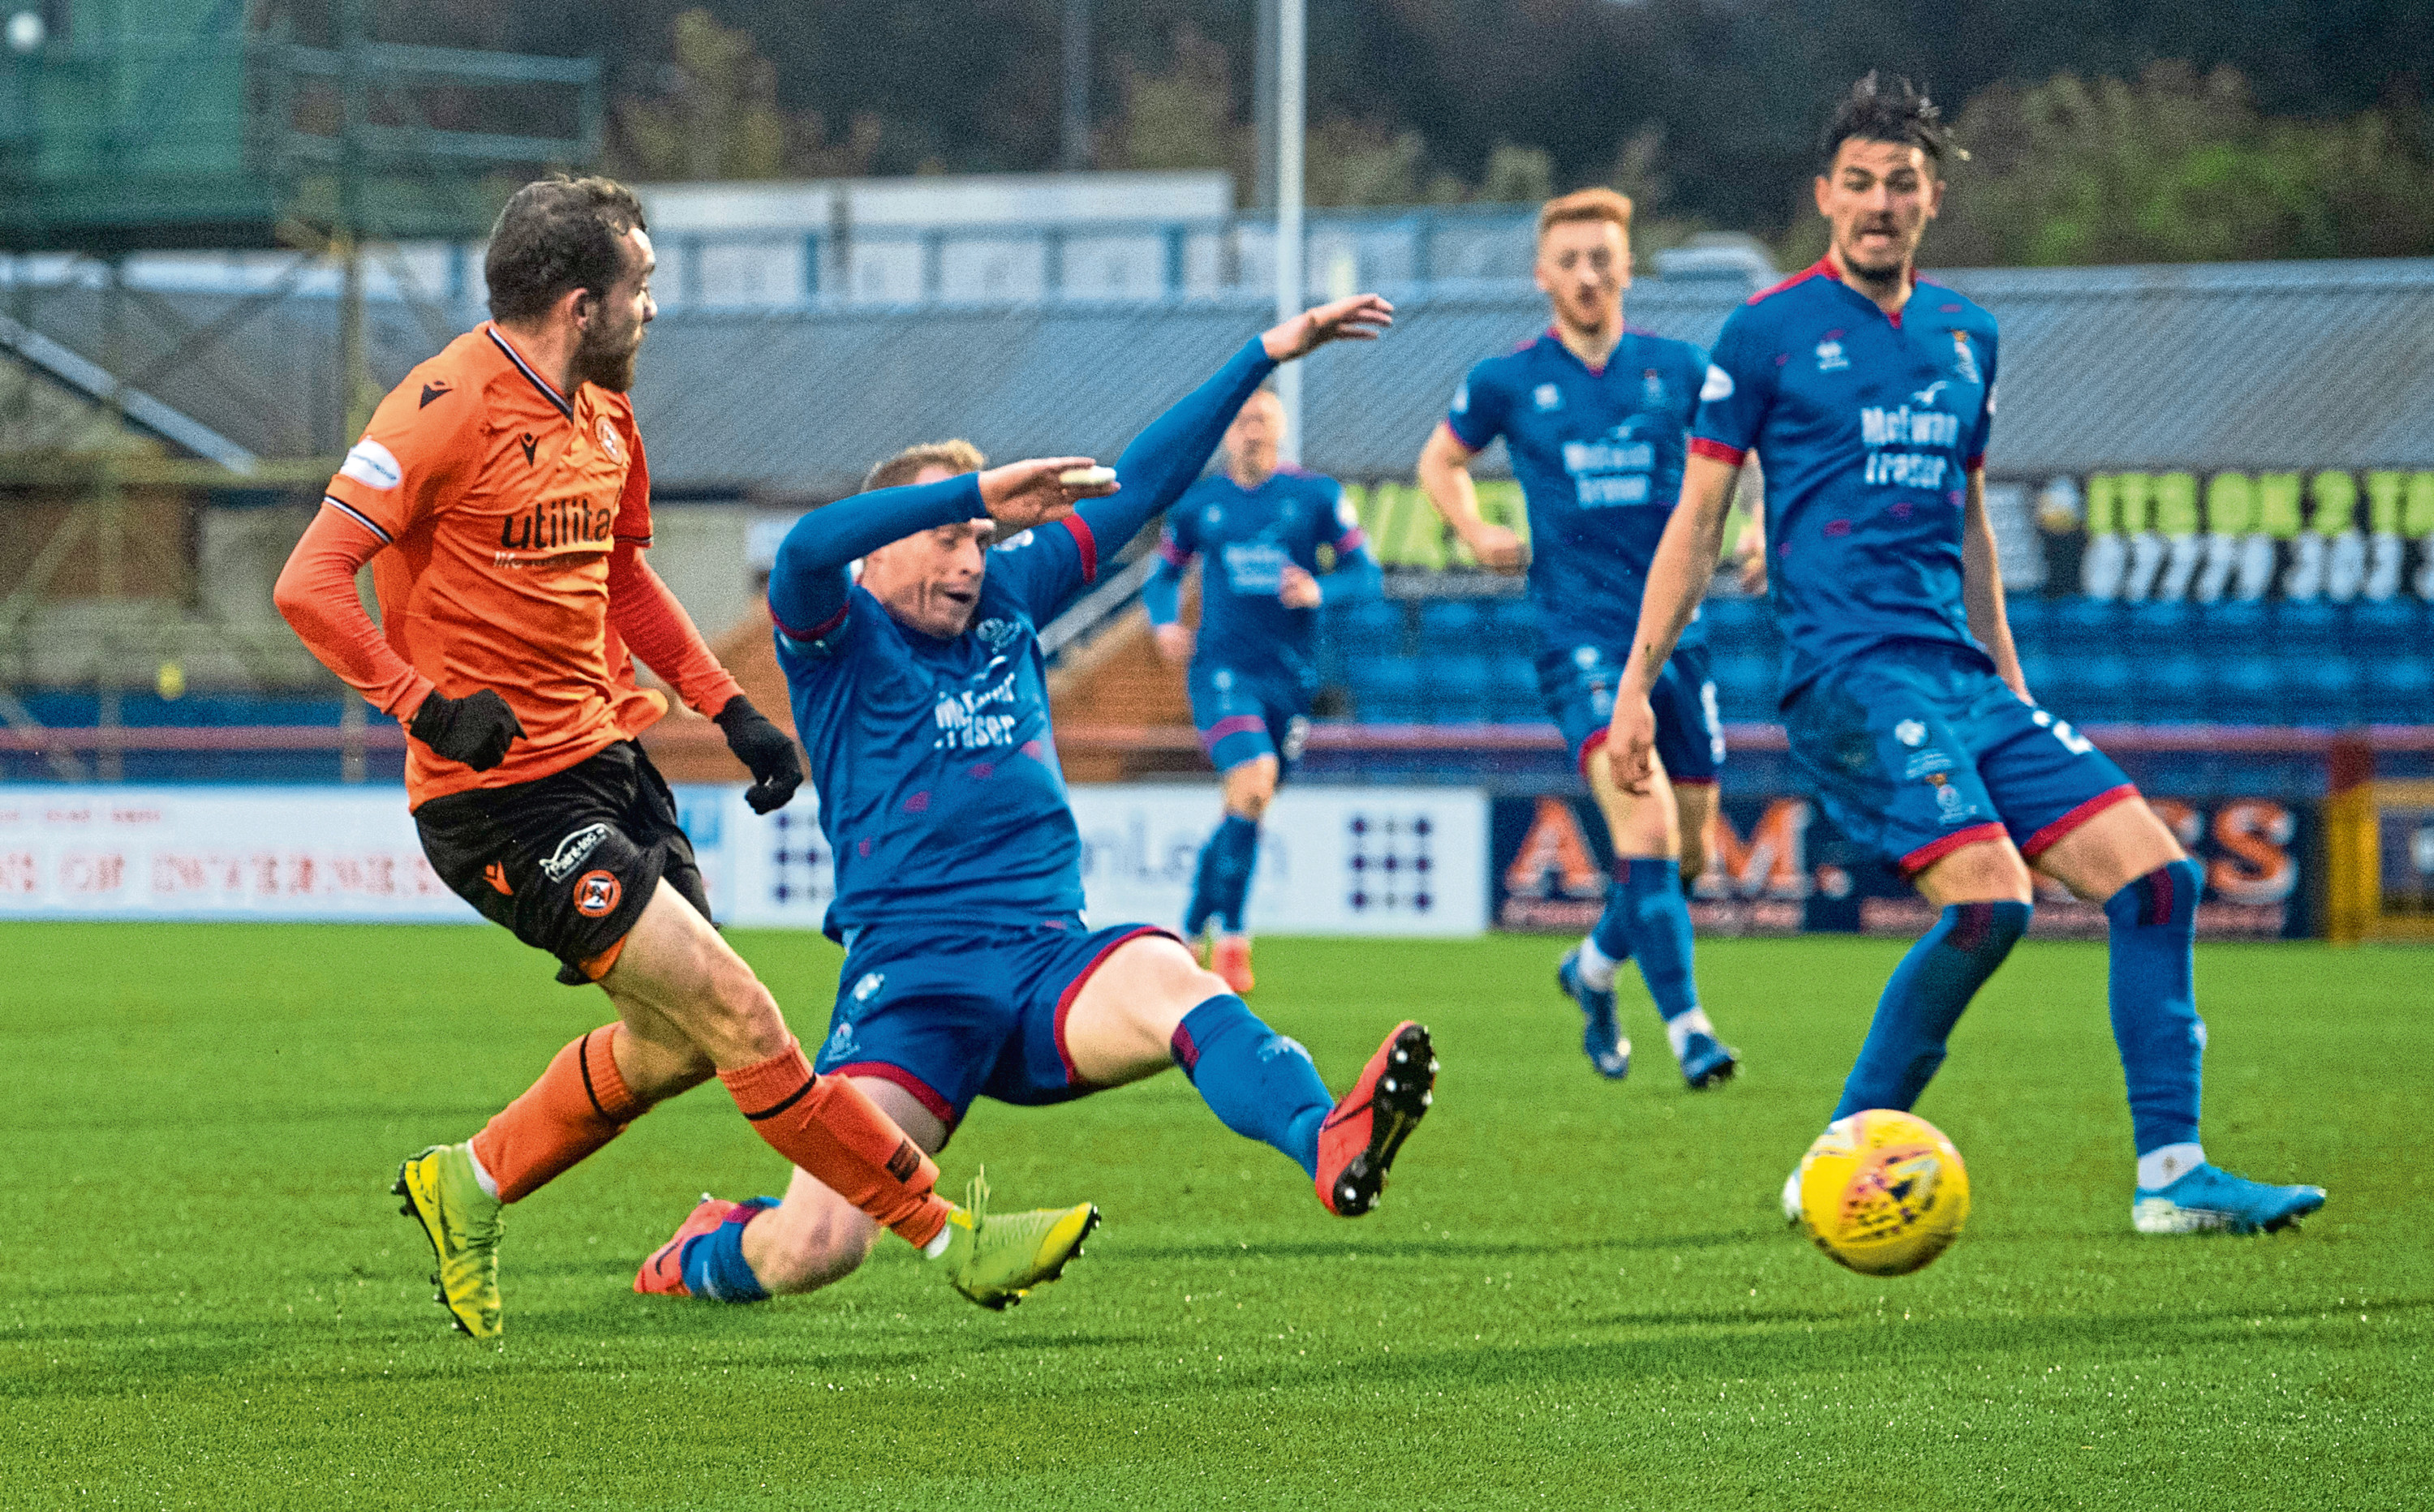 Dundee Utd's Paul McMullan's shot is deflected into the goal off Inverness' Shaun Rooney to make it 1-0 during the Ladbrokes Championship match between Inverness CT and Dundee United